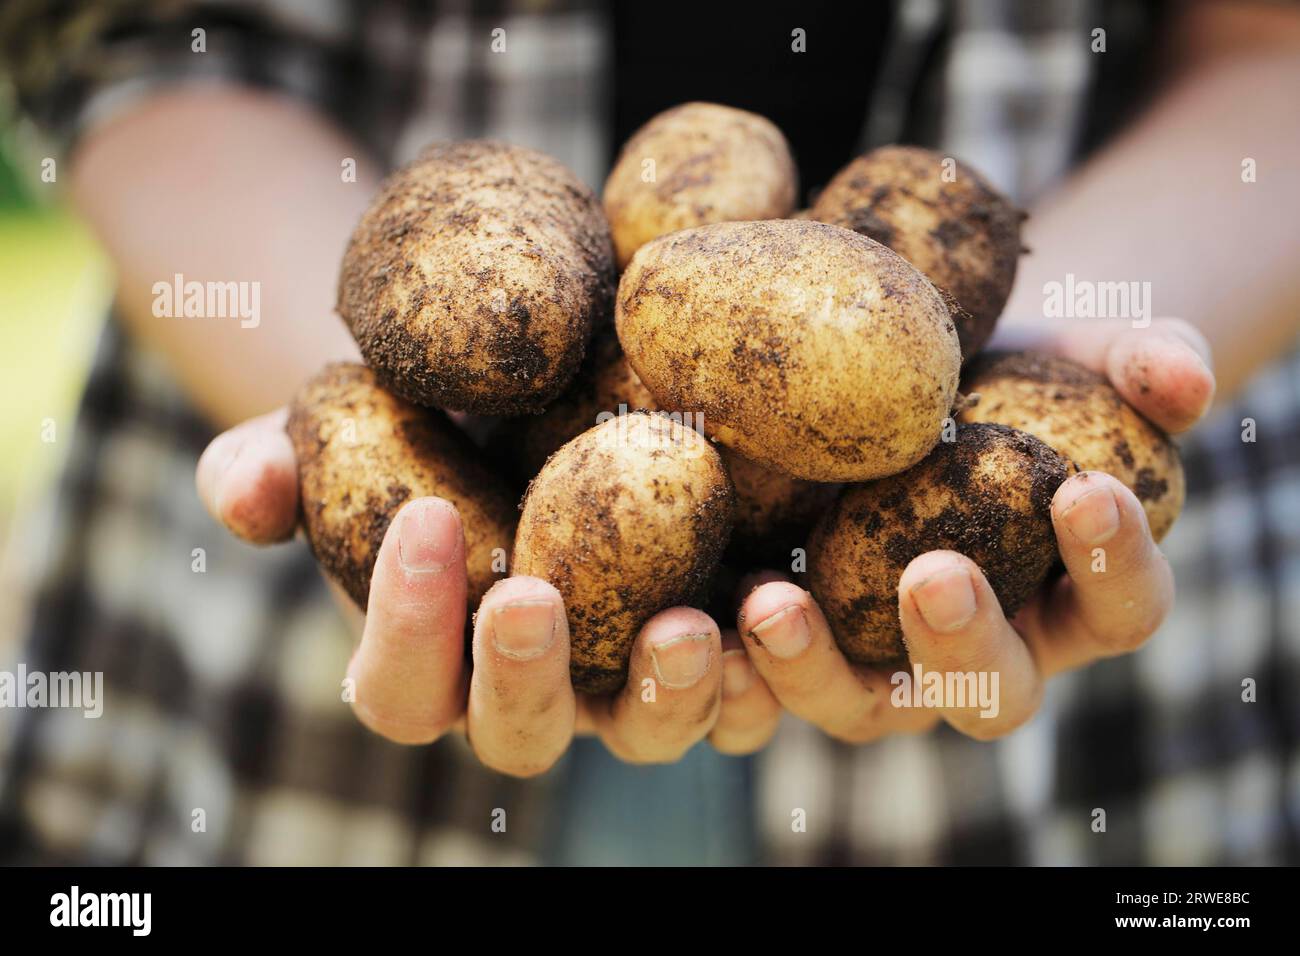 Farmer holding harvested potatoes in his hands Stock Photo